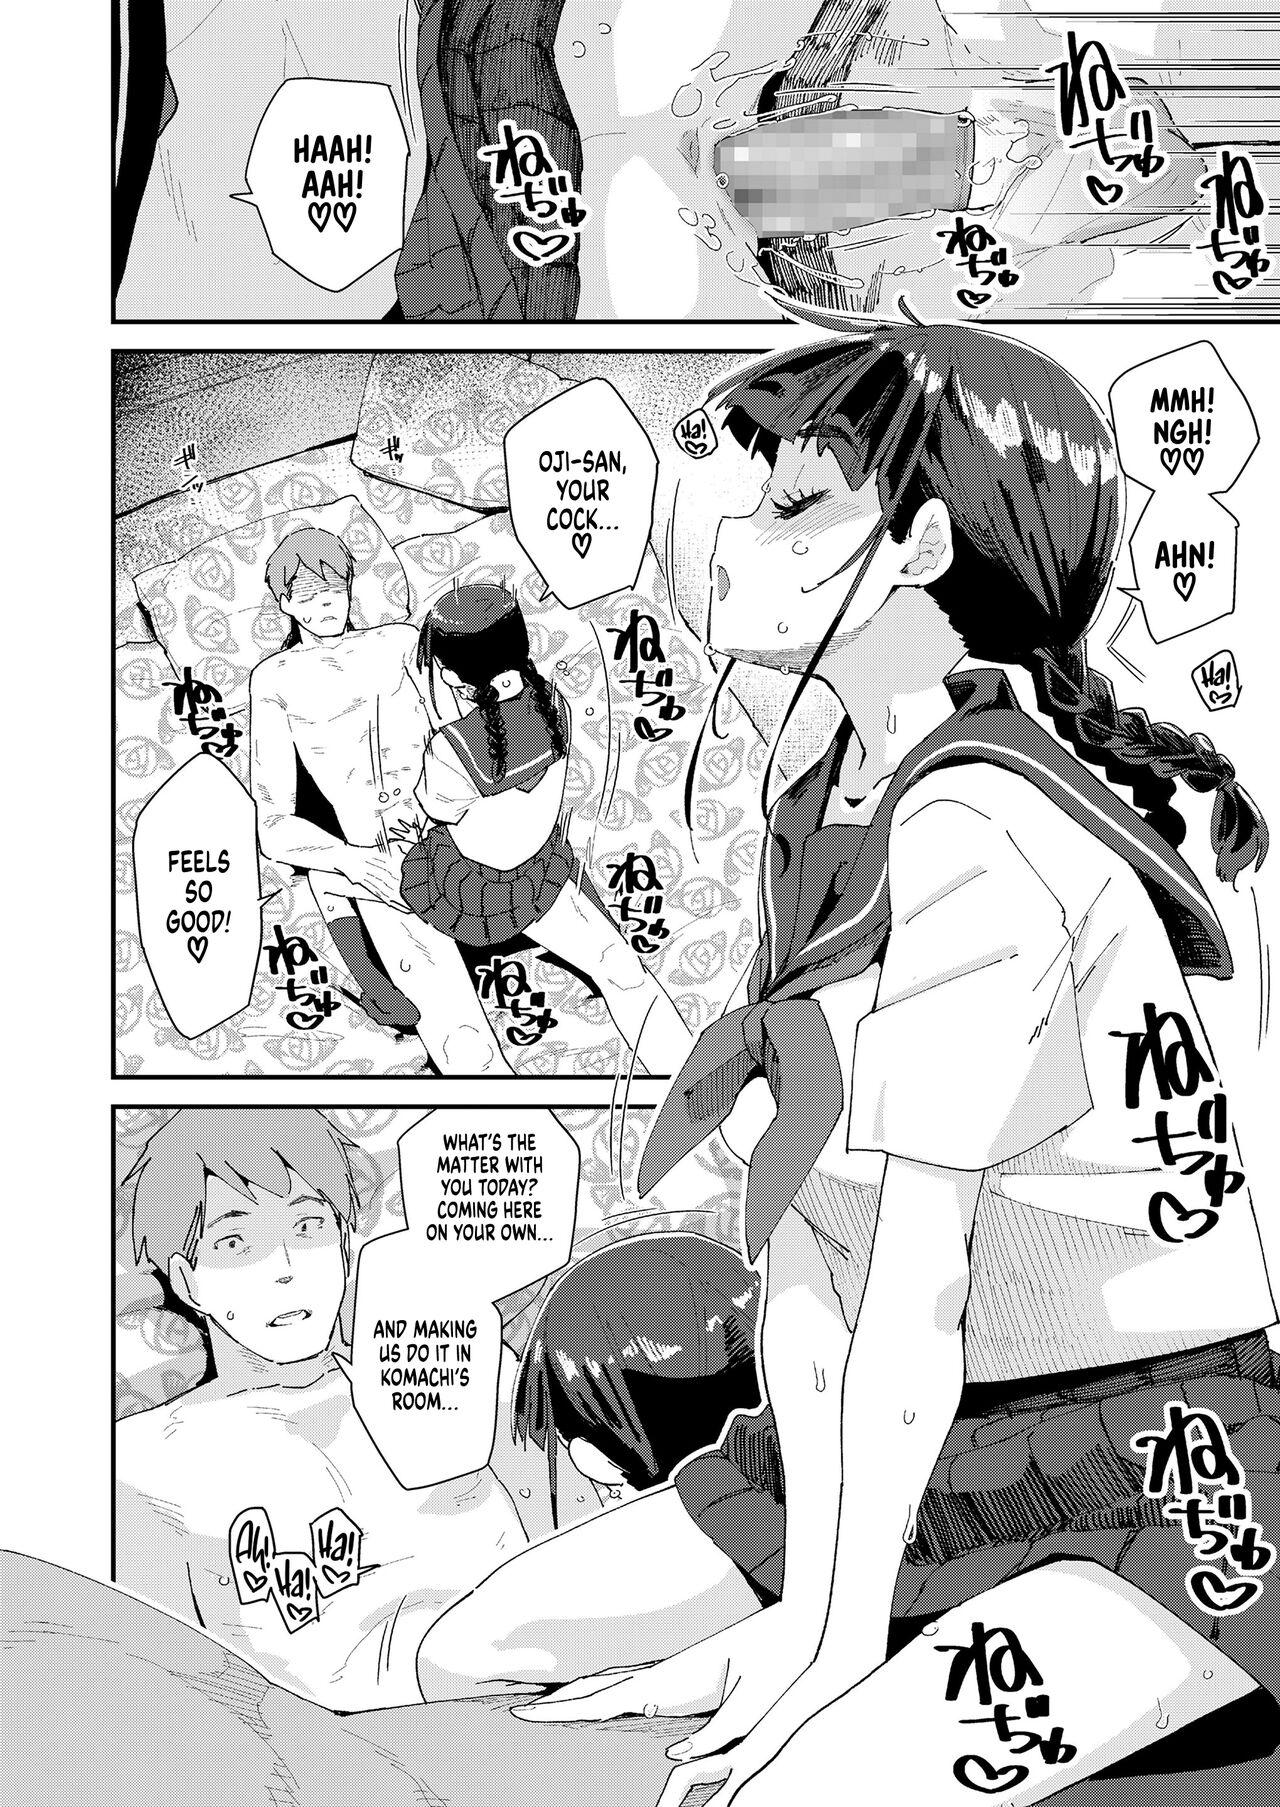 Slave Mitsu to Chou 3 | Nectar & Butterfly 3 Best Blowjob Ever - Page 4